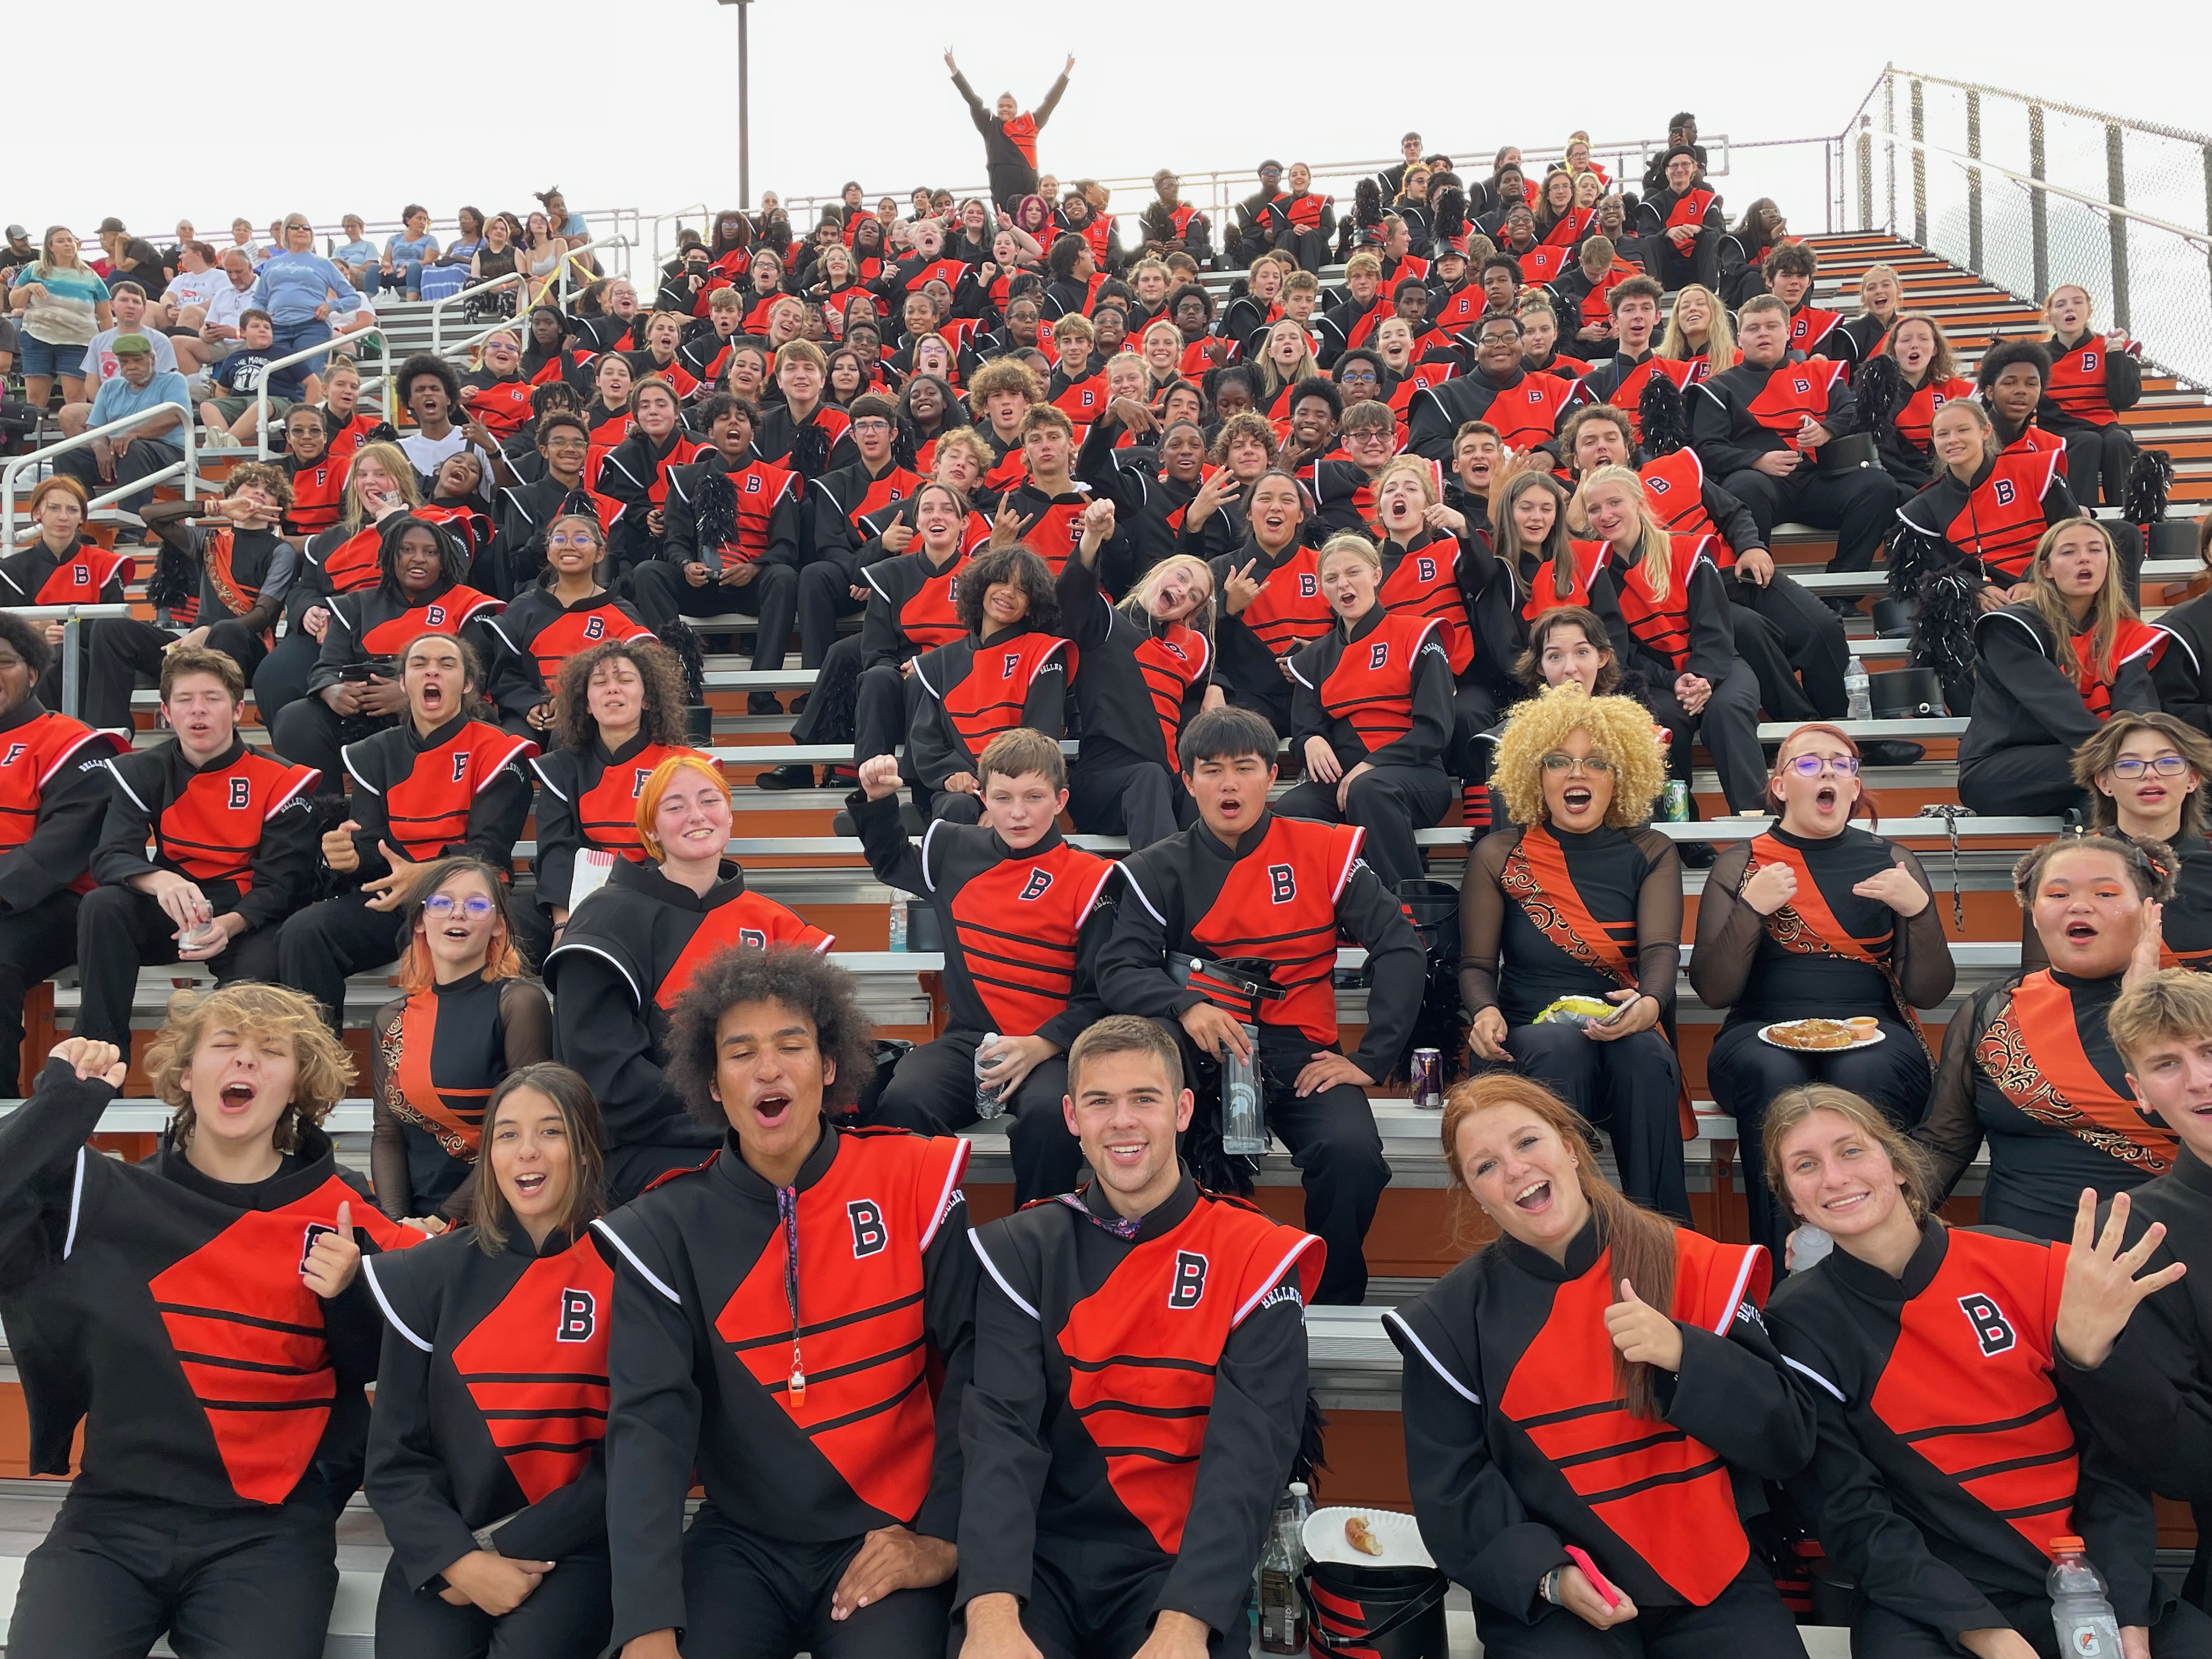 BHS - Marching Band